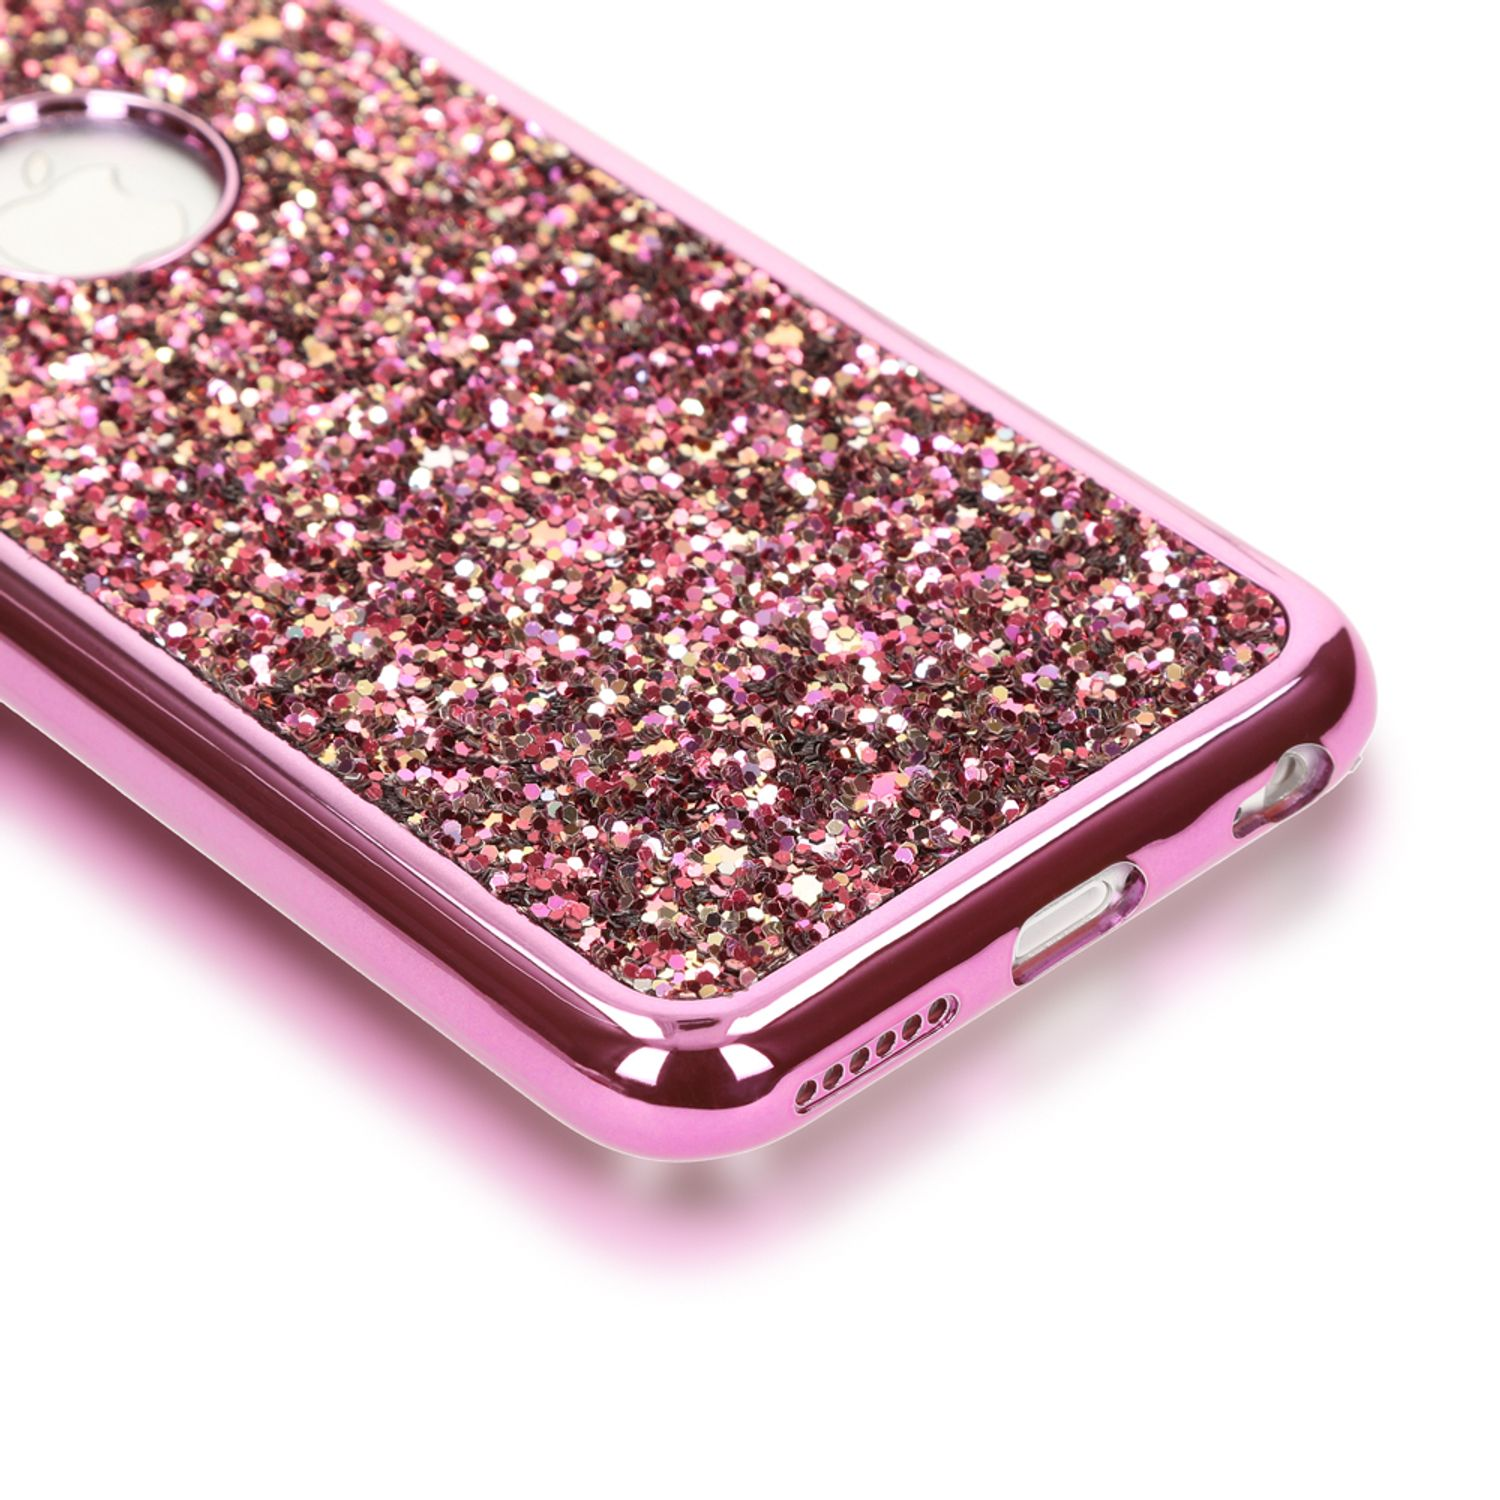 Hülle, iPhone NALIA 6s, Glitzer Silikon Mouse-Look 6 Apple, iPhone Backcover, Pink